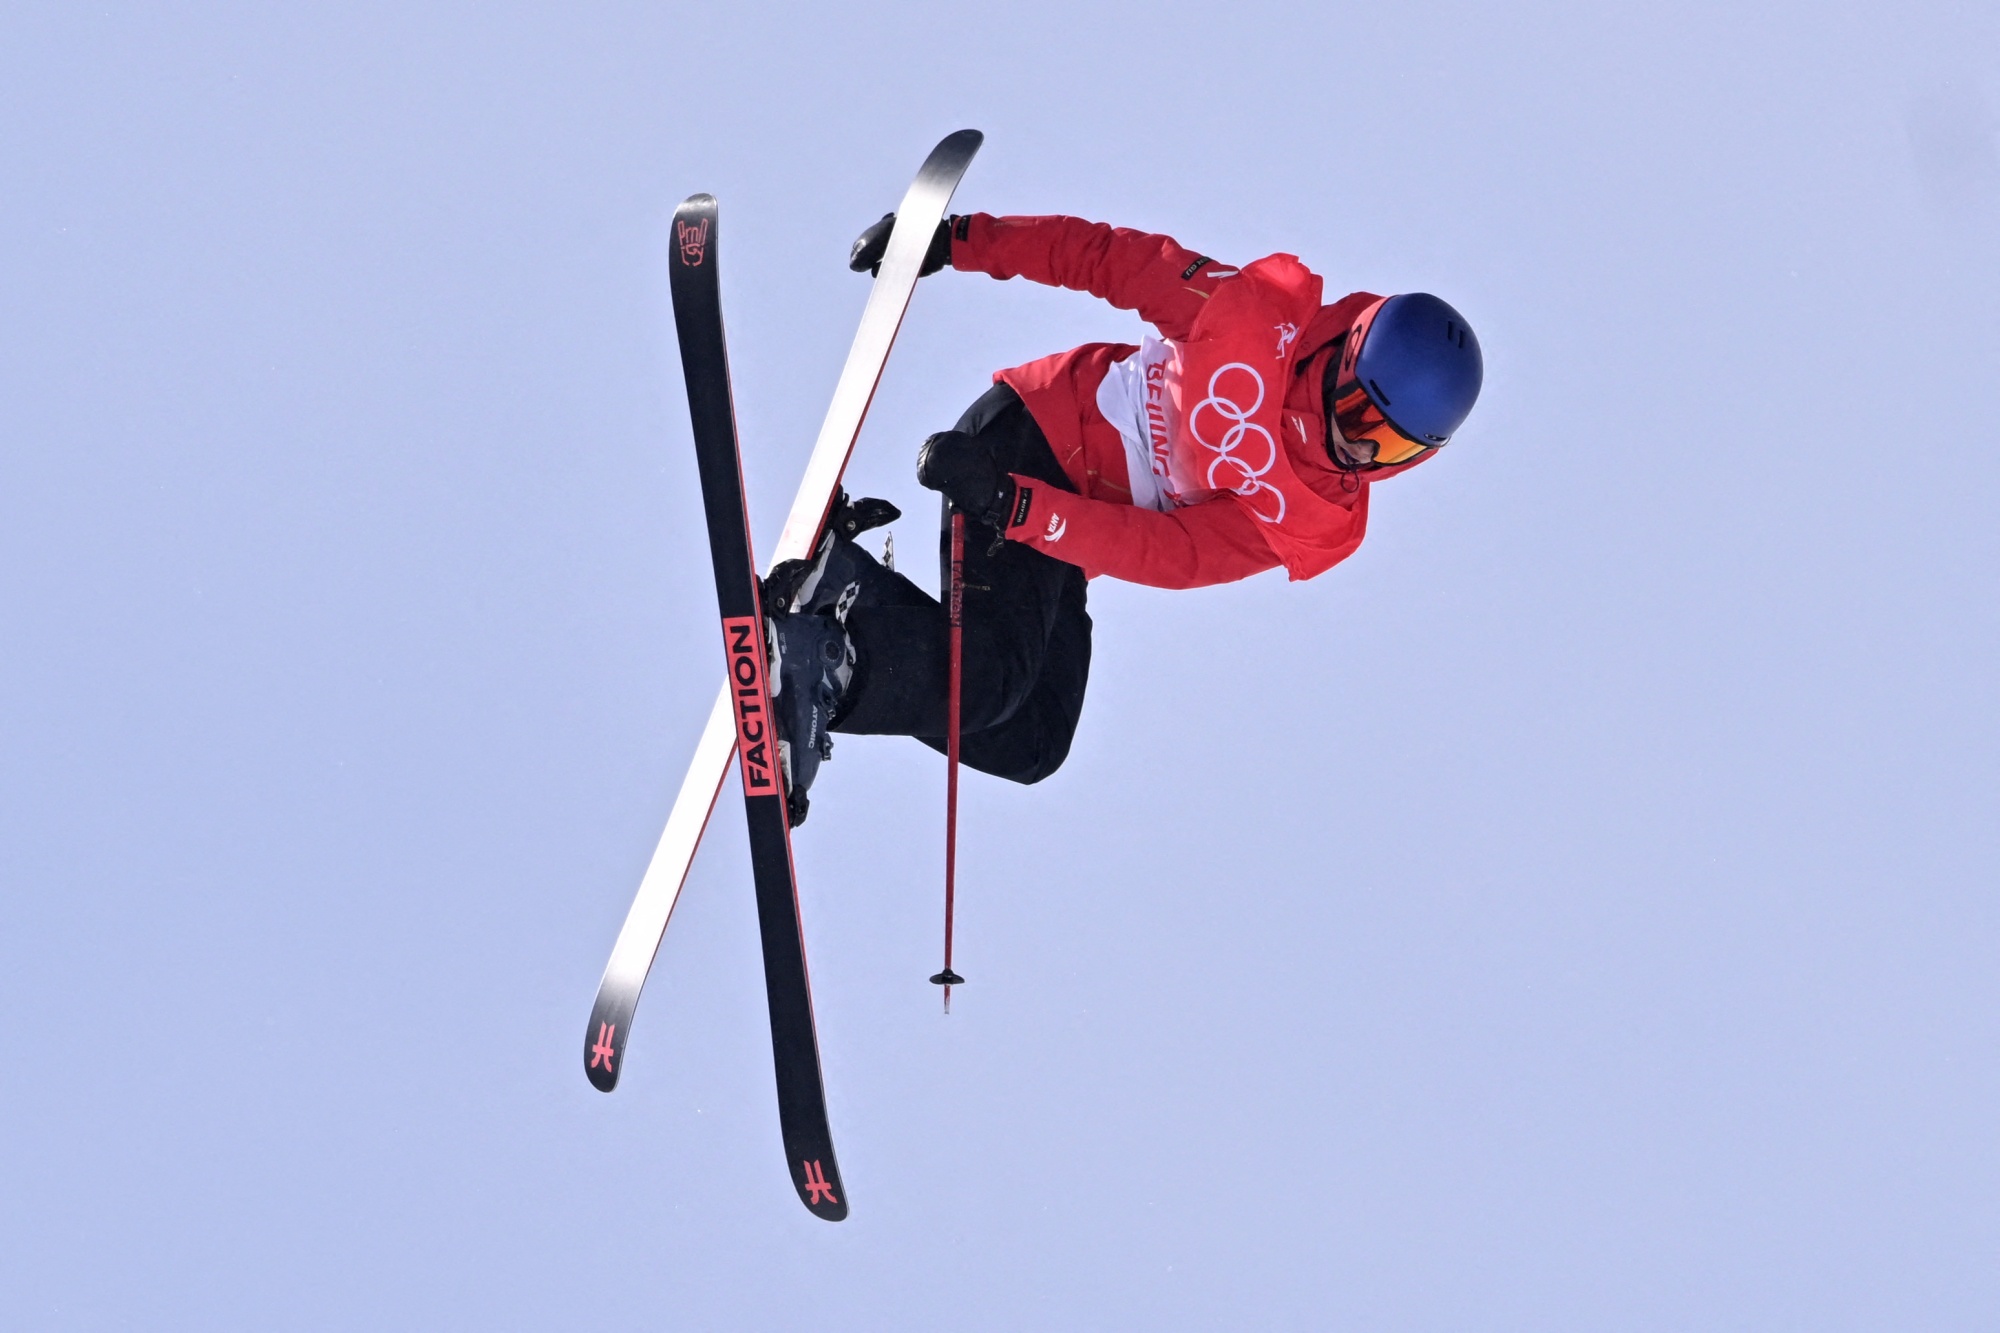 Eileen Gu Takes Silver in Slopestyle - The New York Times